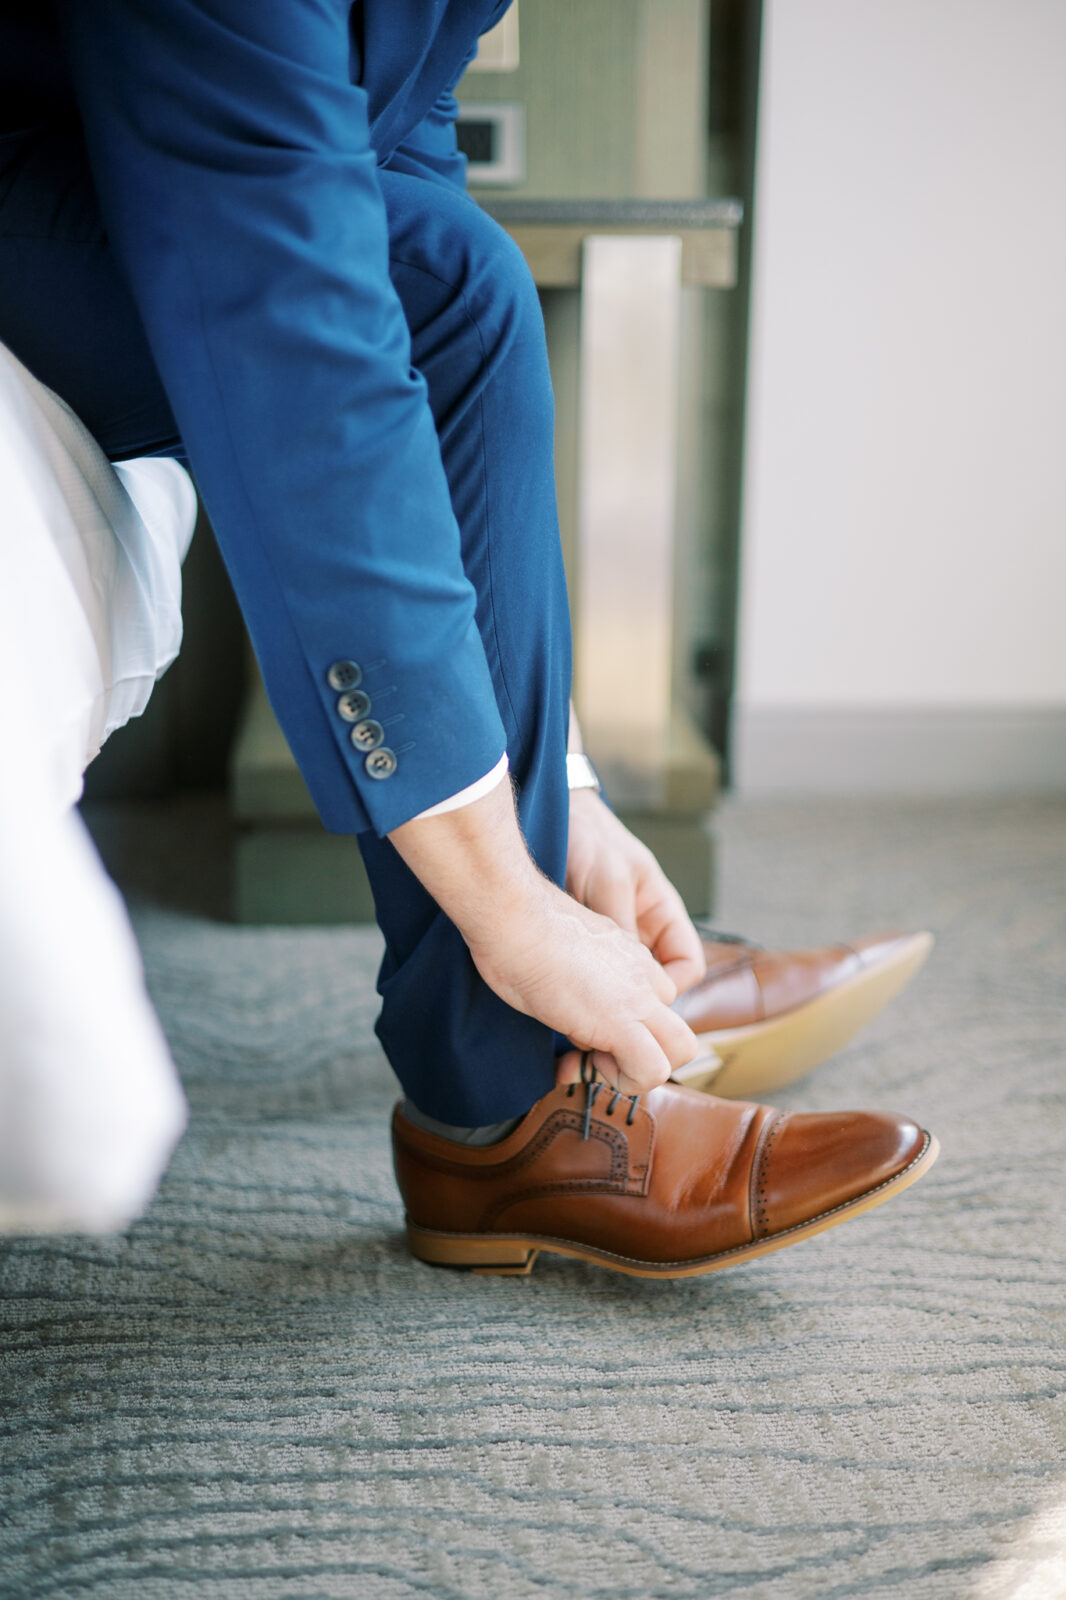 groom laces shoes on wedding day, groom attire